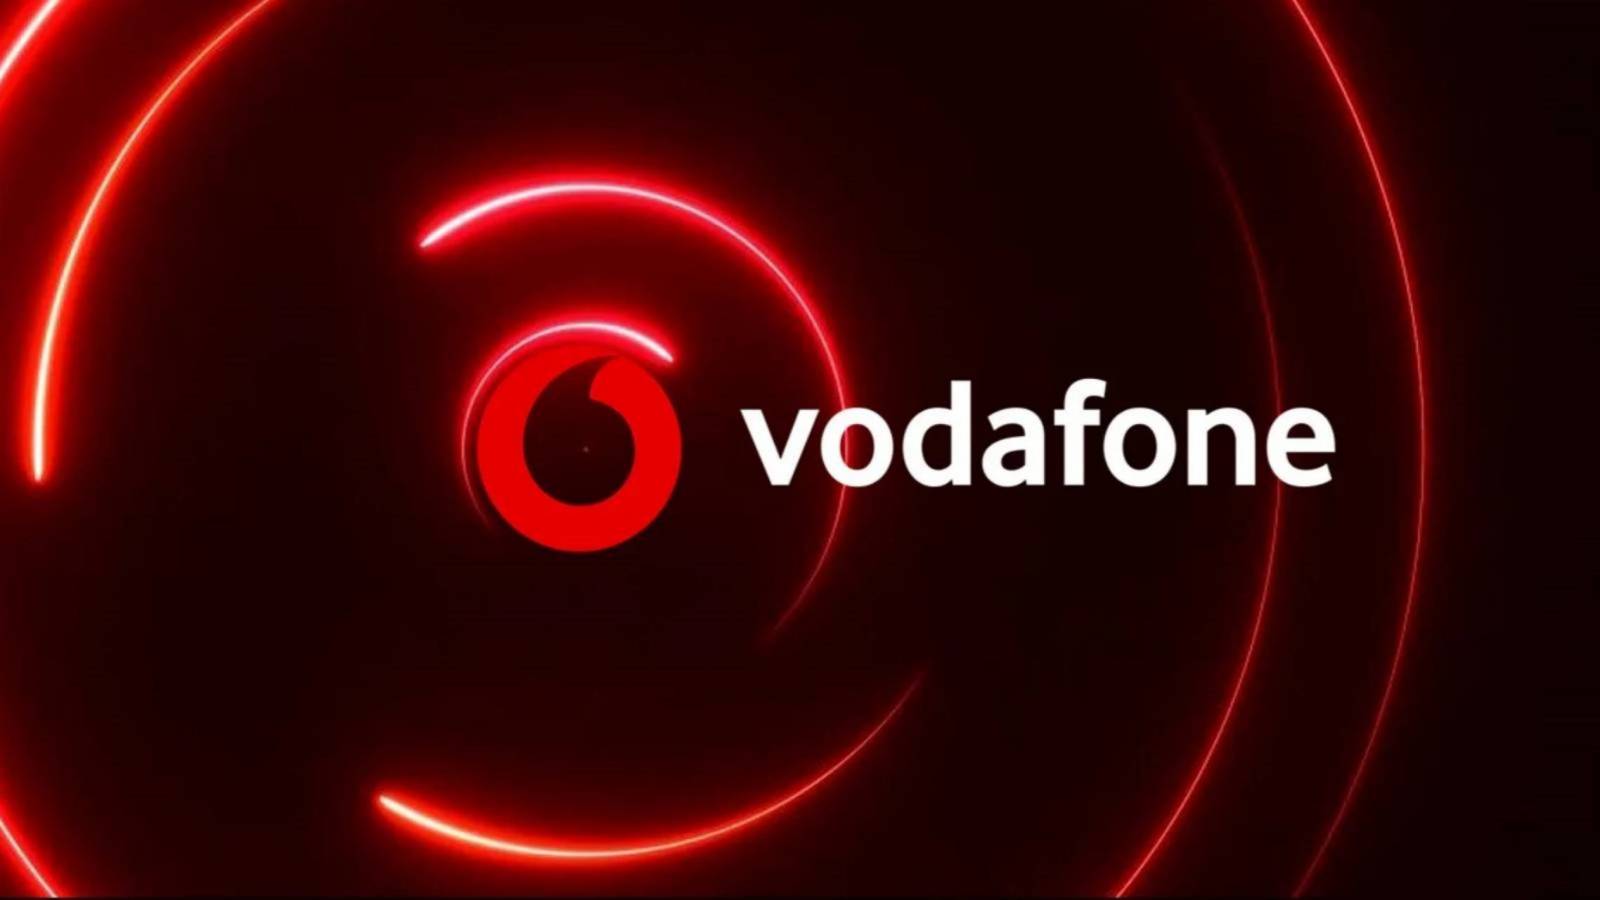 Vodafone young people